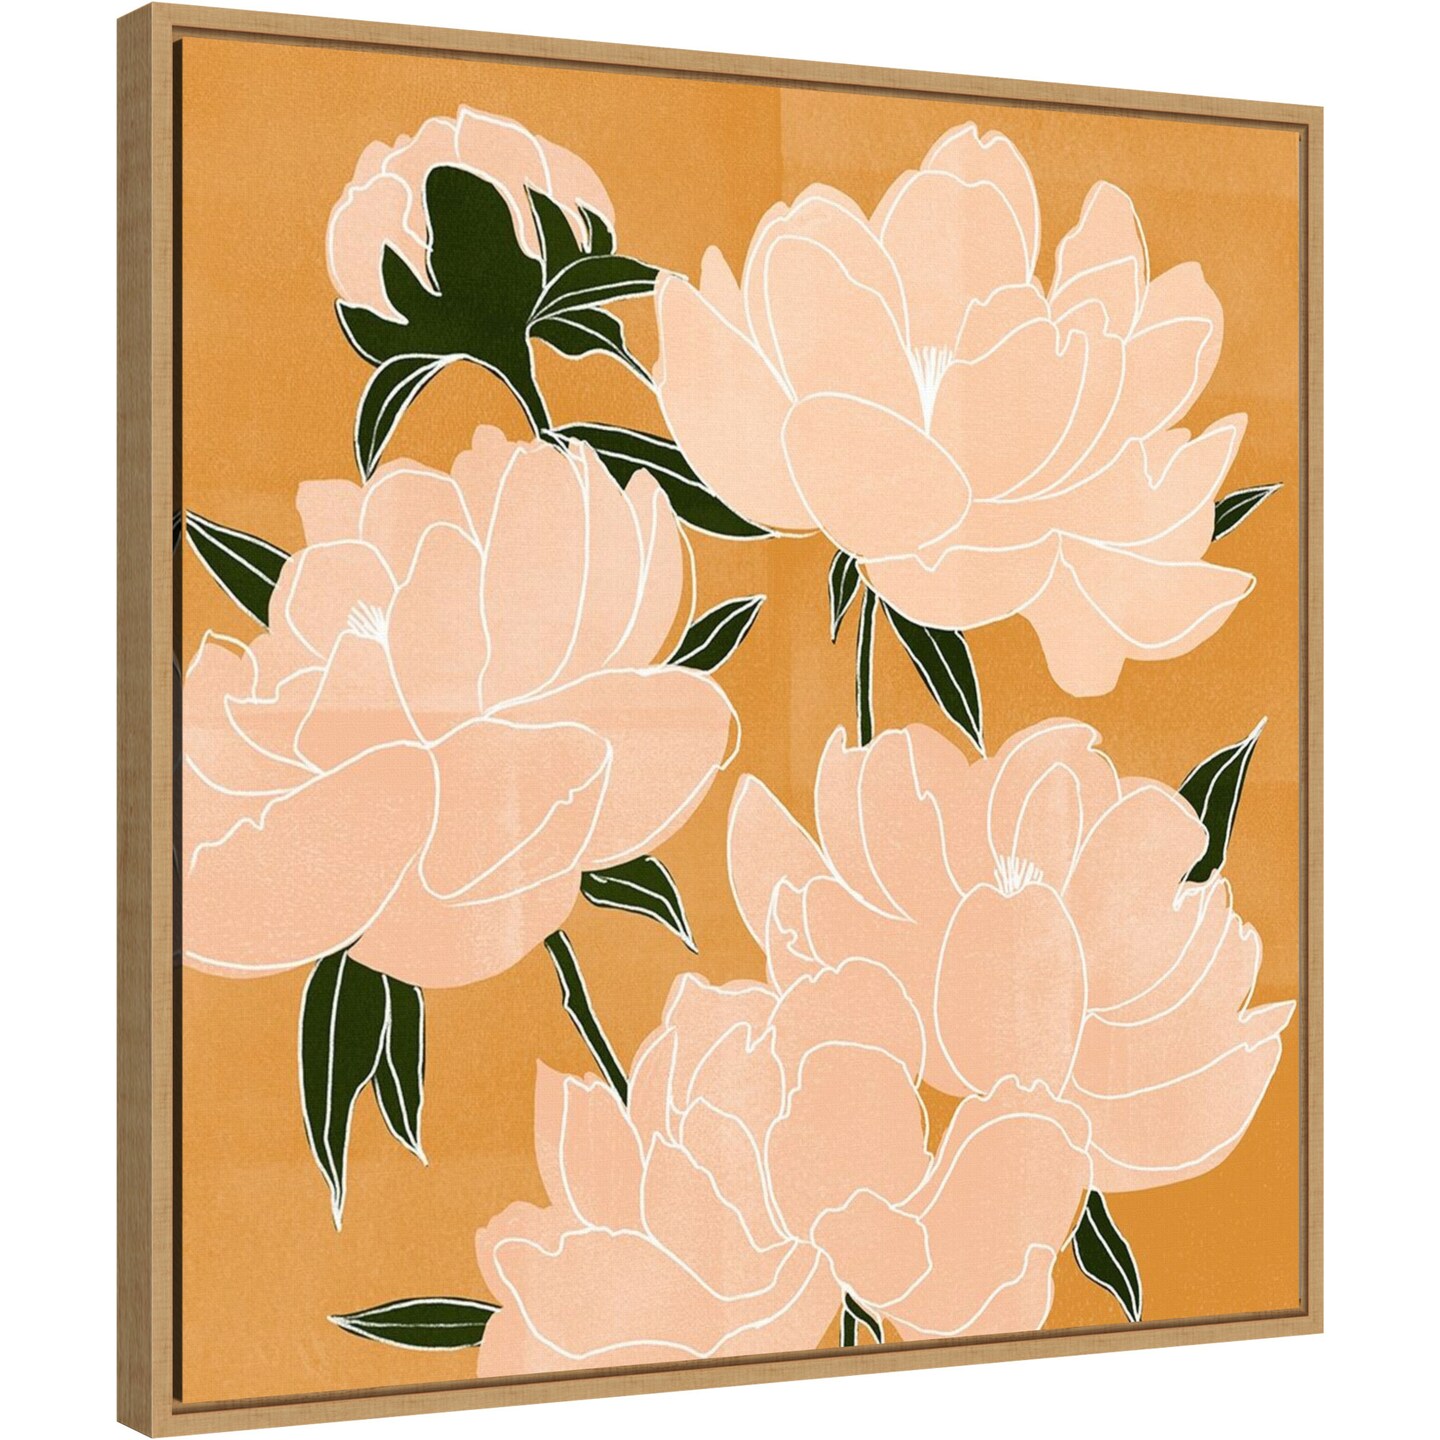 Modern Peonies I by Emma Scarvey 22-in. W x 22-in. H. Canvas Wall Art Print Framed in Natural